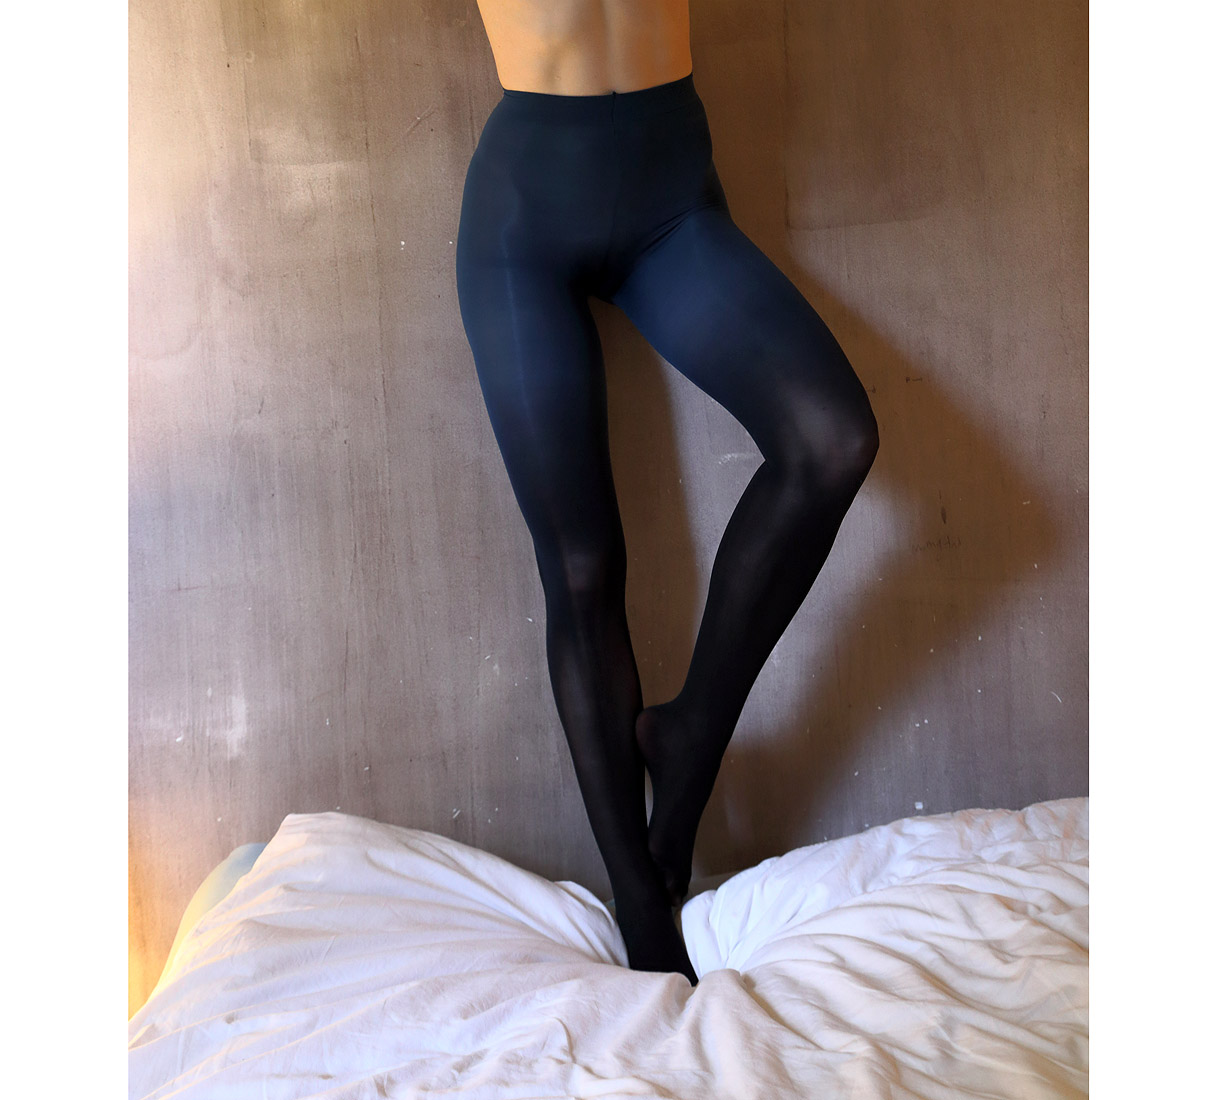 Teal Ombre Tights | Dip Dyed Gradient Tights by Velvet Heart | Playful Sophisticated Legwear at Between the Sheets